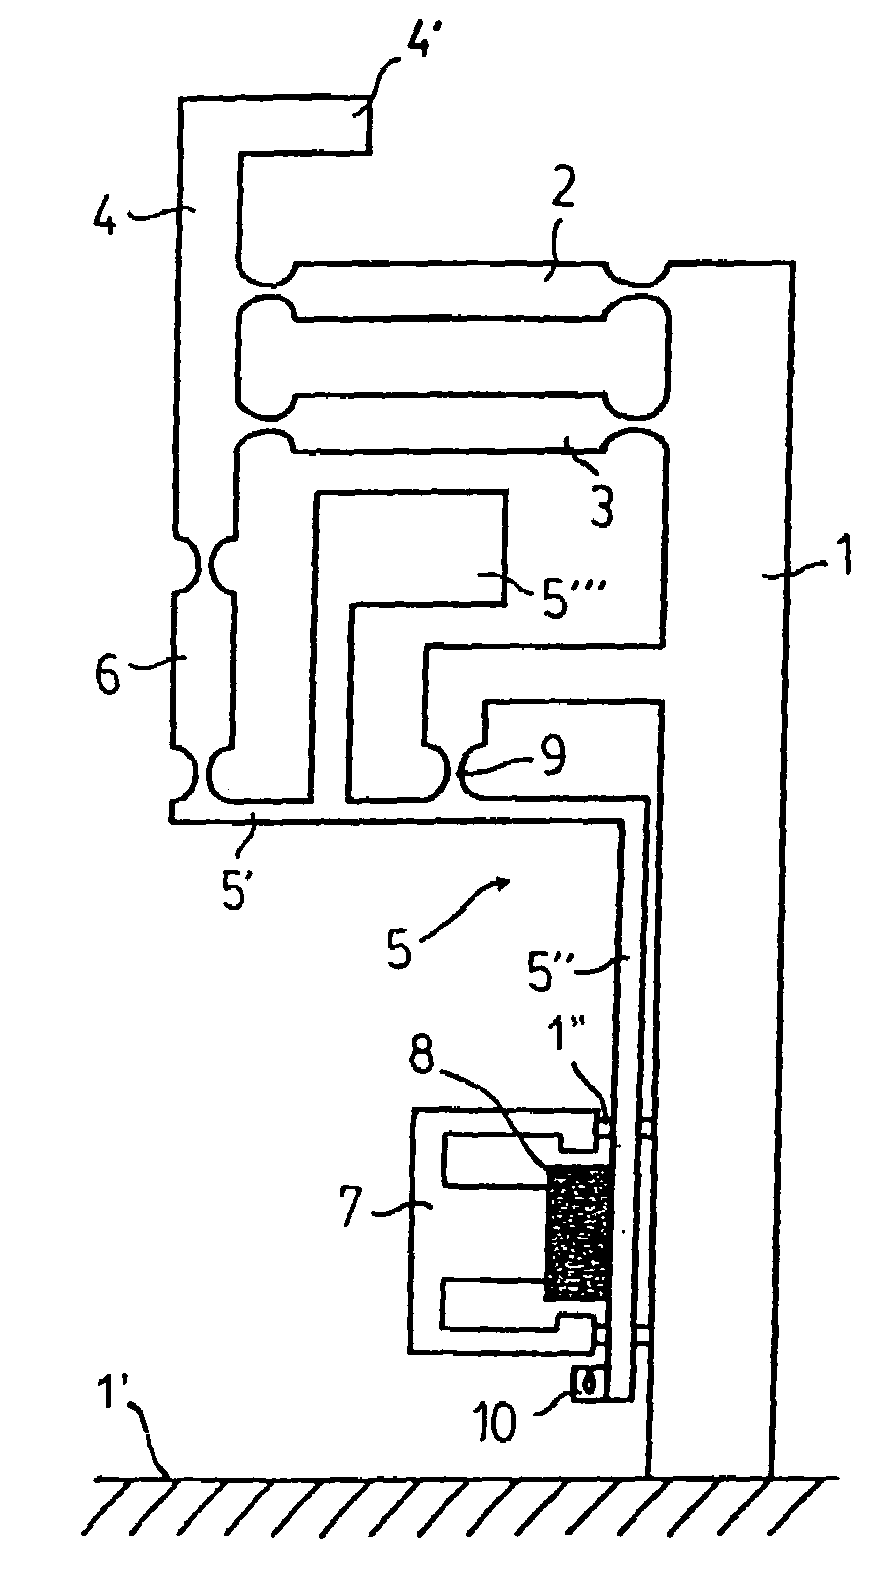 Weighing system having an angle lever with a long vertical lever arm